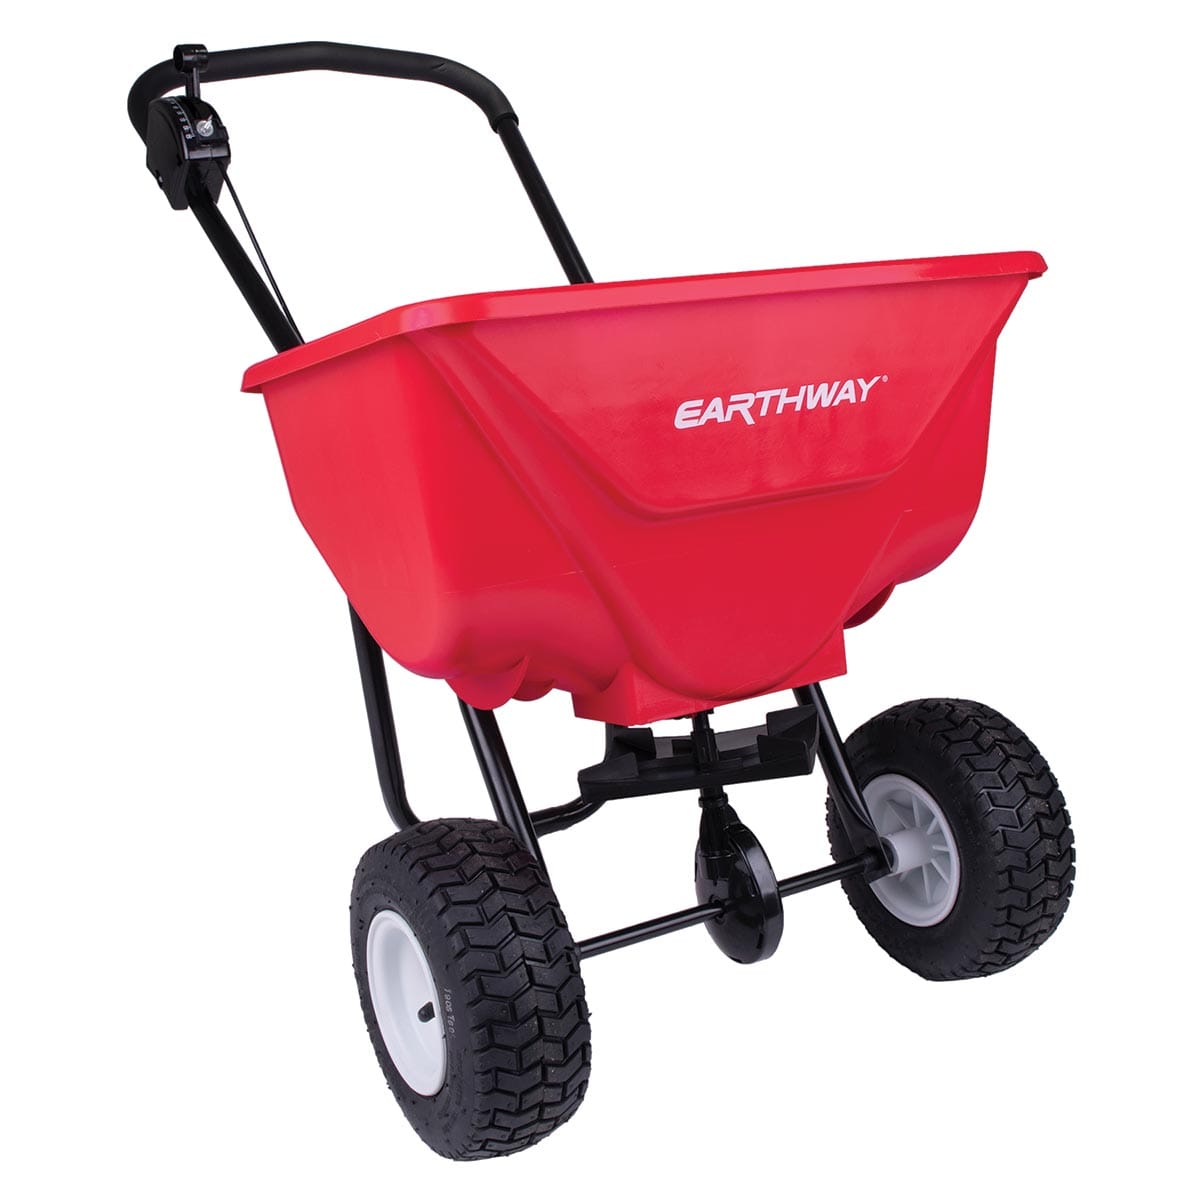 Earthway® Deluxe 2030P-Plus Spreader with 9" Pneumatic Wheels